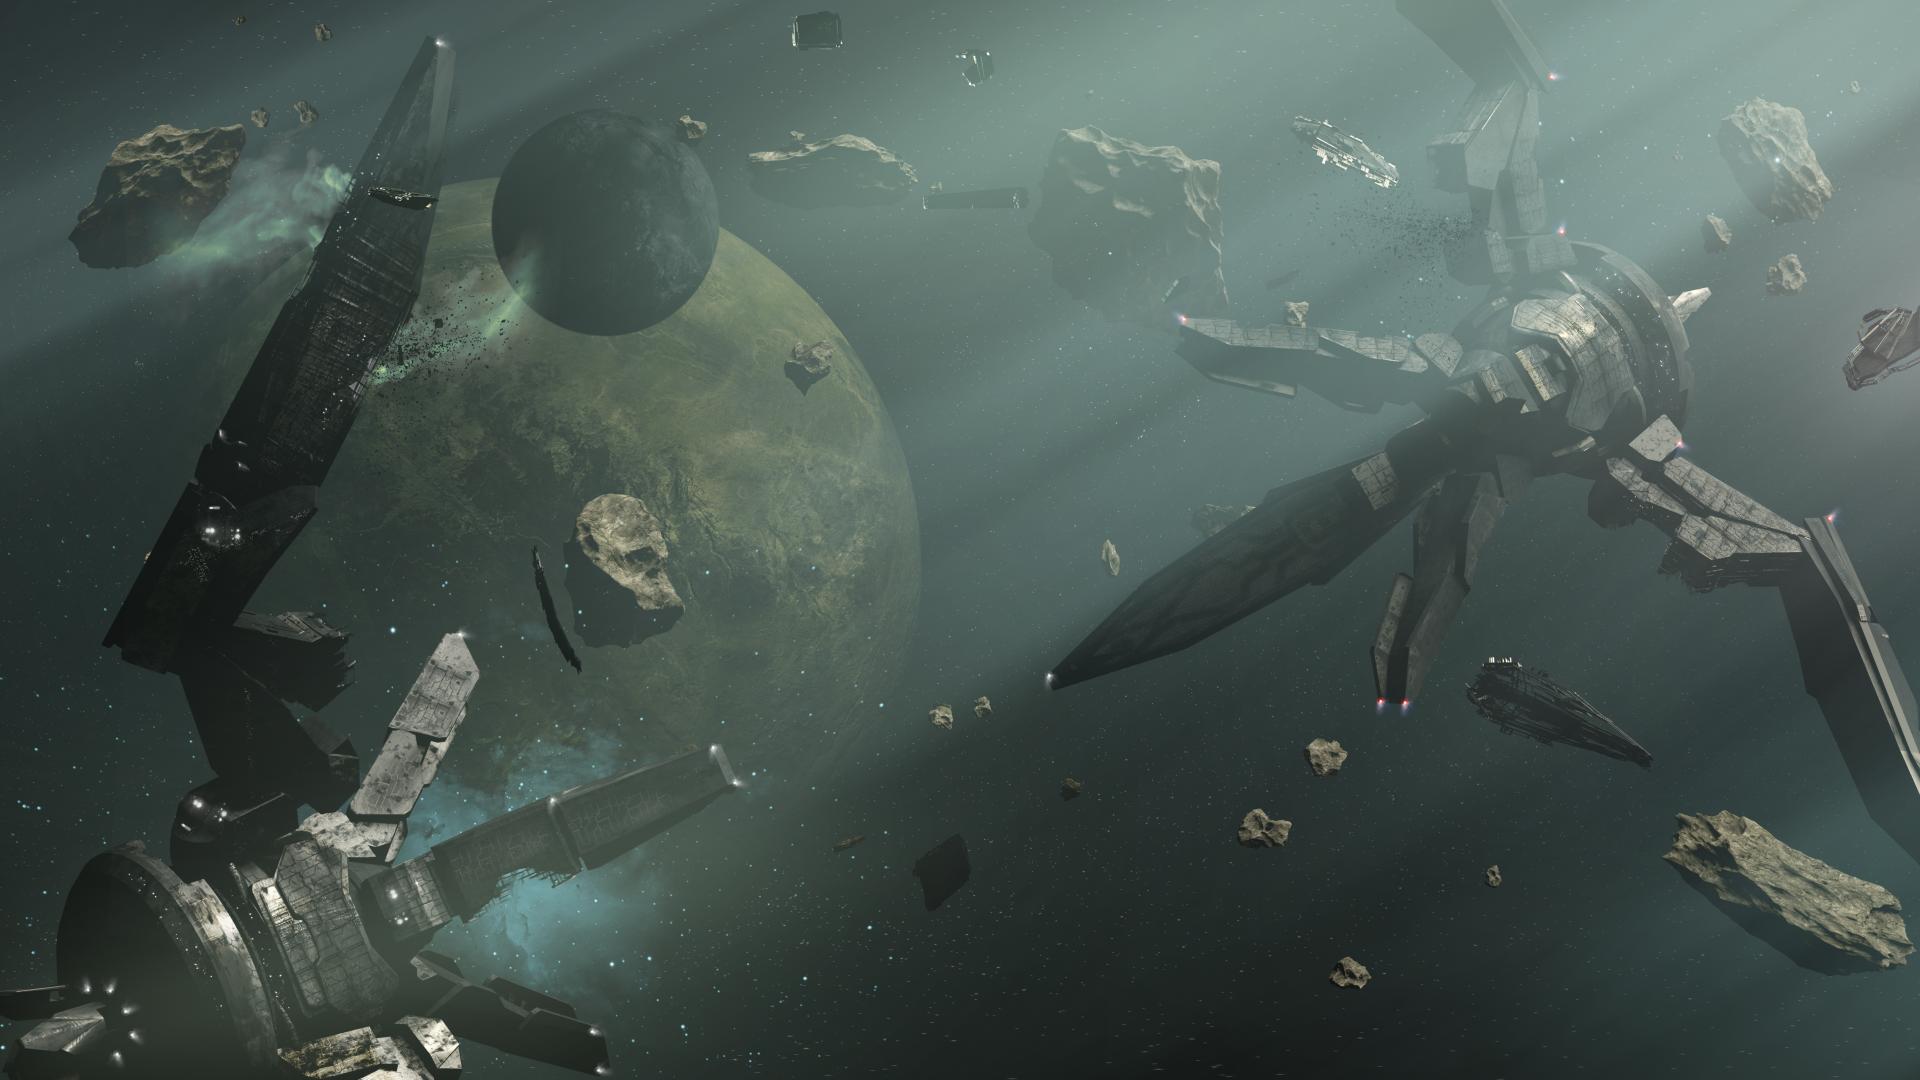 Stellaris Want Some More Cool Stellaris Wallpapers Today We Have 1 From Ancient Relics Launch Trailer And 2 From The Distant Stars Trailer All Three In 3 Sizes